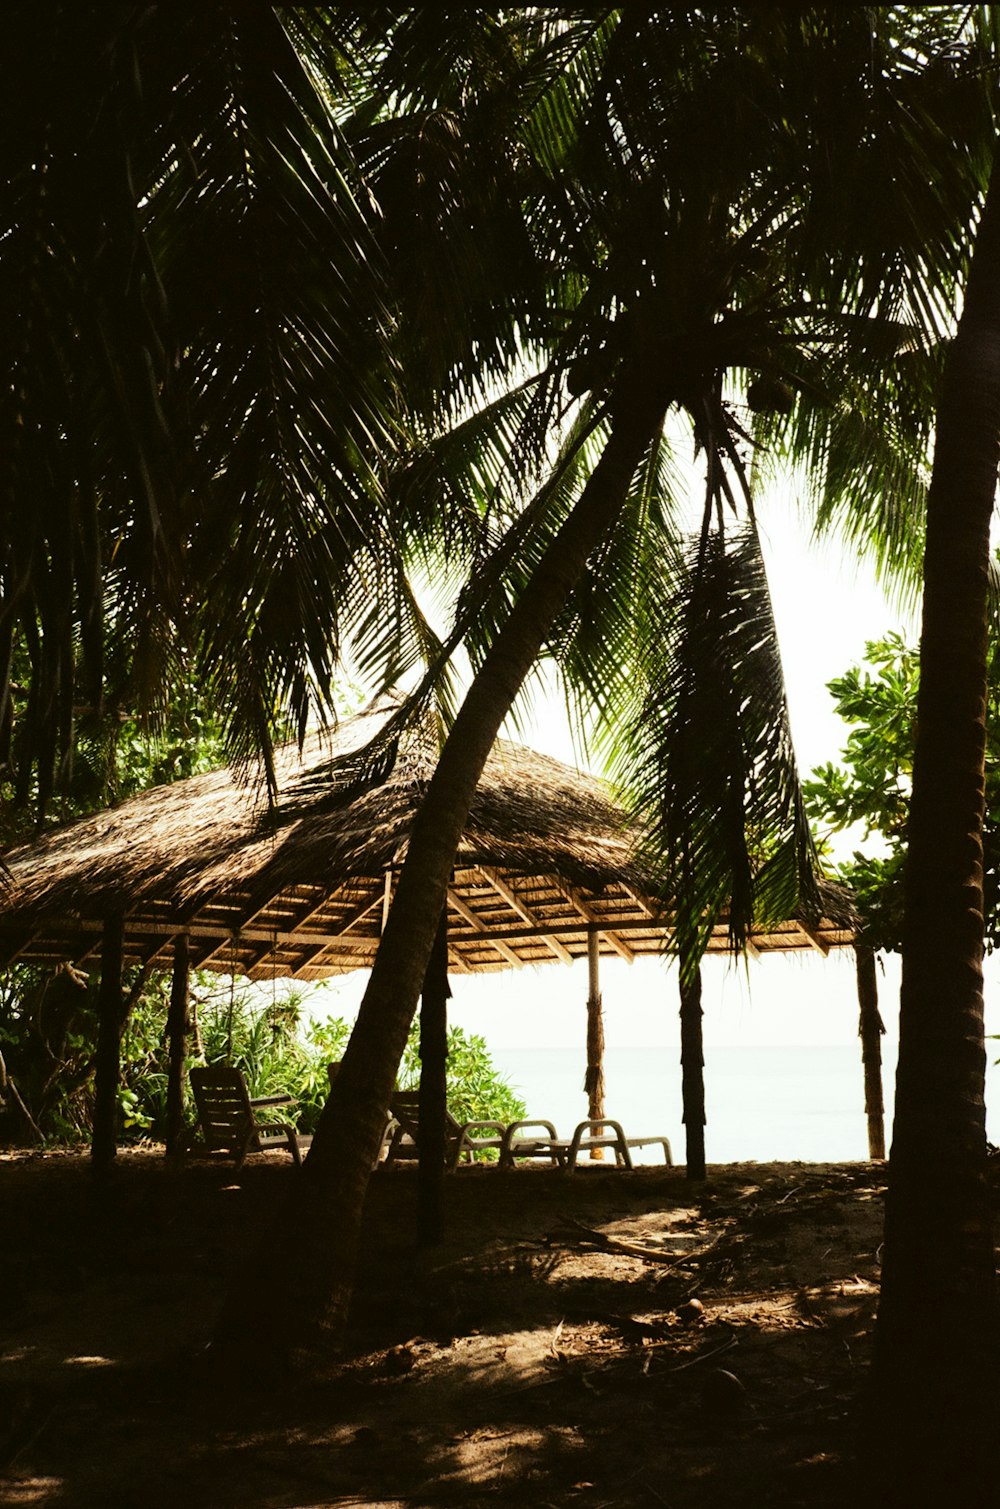 a hut with a thatched roof is surrounded by palm trees